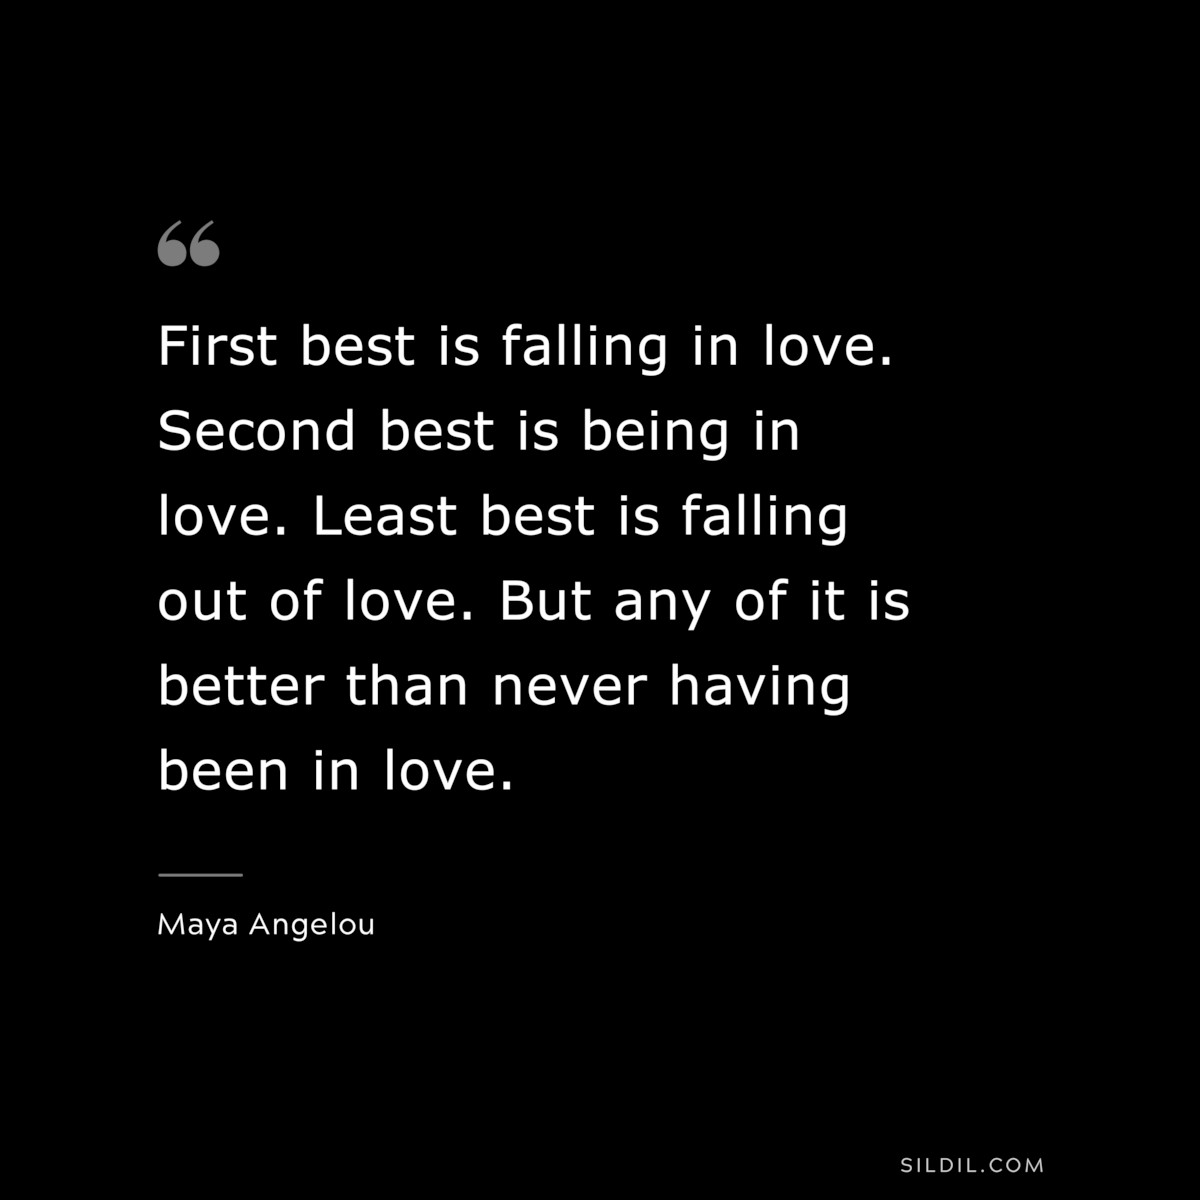 First best is falling in love. Second best is being in love. Least best is falling out of love. But any of it is better than never having been in love. ― Maya Angelou